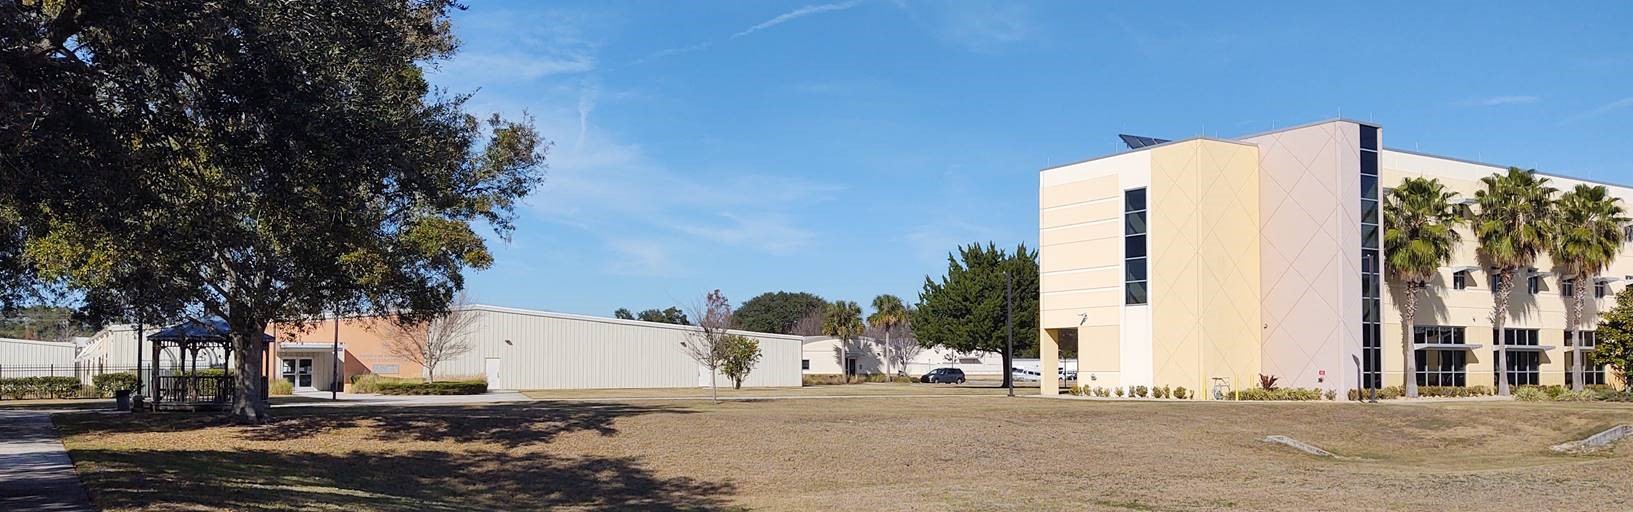 Panoramic view of the Florida Bureau of Braille and Talking Book Library and Rehab the Center.